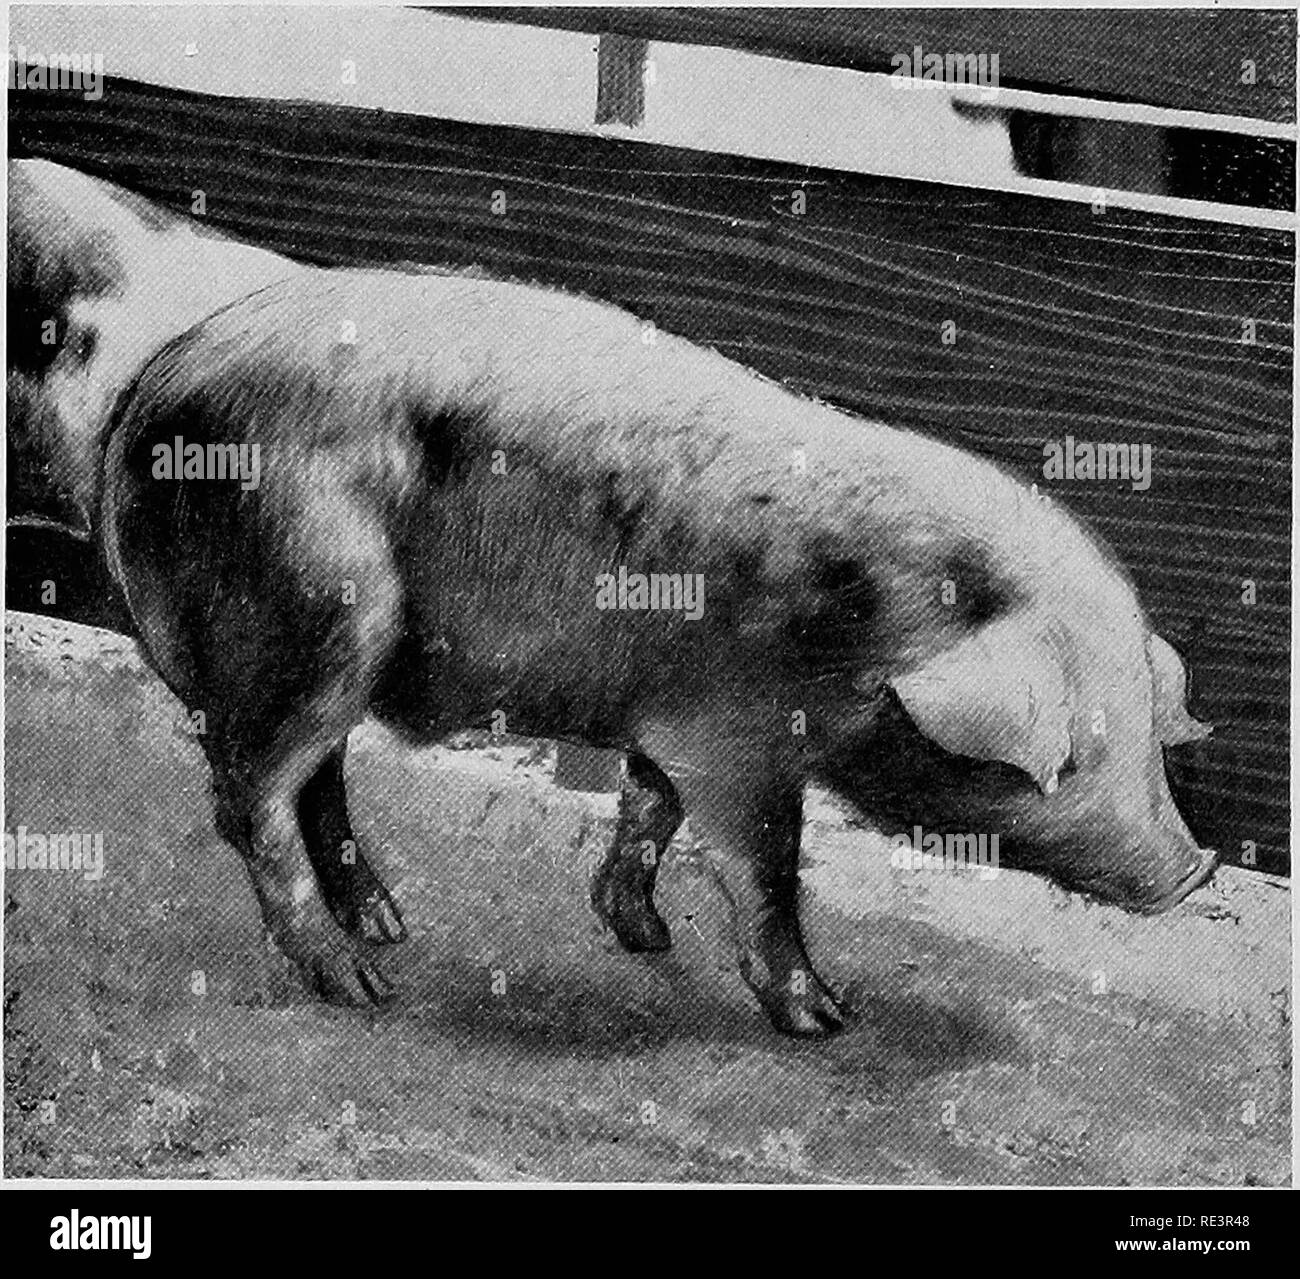 . Swine practice . Swine. 272 SWINE PRACTICE America, and at this time it is the most important disease econom- ically in the United States. Etiology.—The cause of hog cholera is attributed to a tiltrable virus. The relation of a tiltrable virus to hog cholera was first recognized by De Sehweinitz and Dorset in 1904, and similar investi- gations by Boxymeyer of Michigan were also concluded in 1904. Other investigators have verified the findings of De Sehweinitz and Dorset. The virus of hog cholera occurs in the blood and therefore in prac-. Fig. Acute hog cholera (Advanced Stage). tically all  Stock Photo